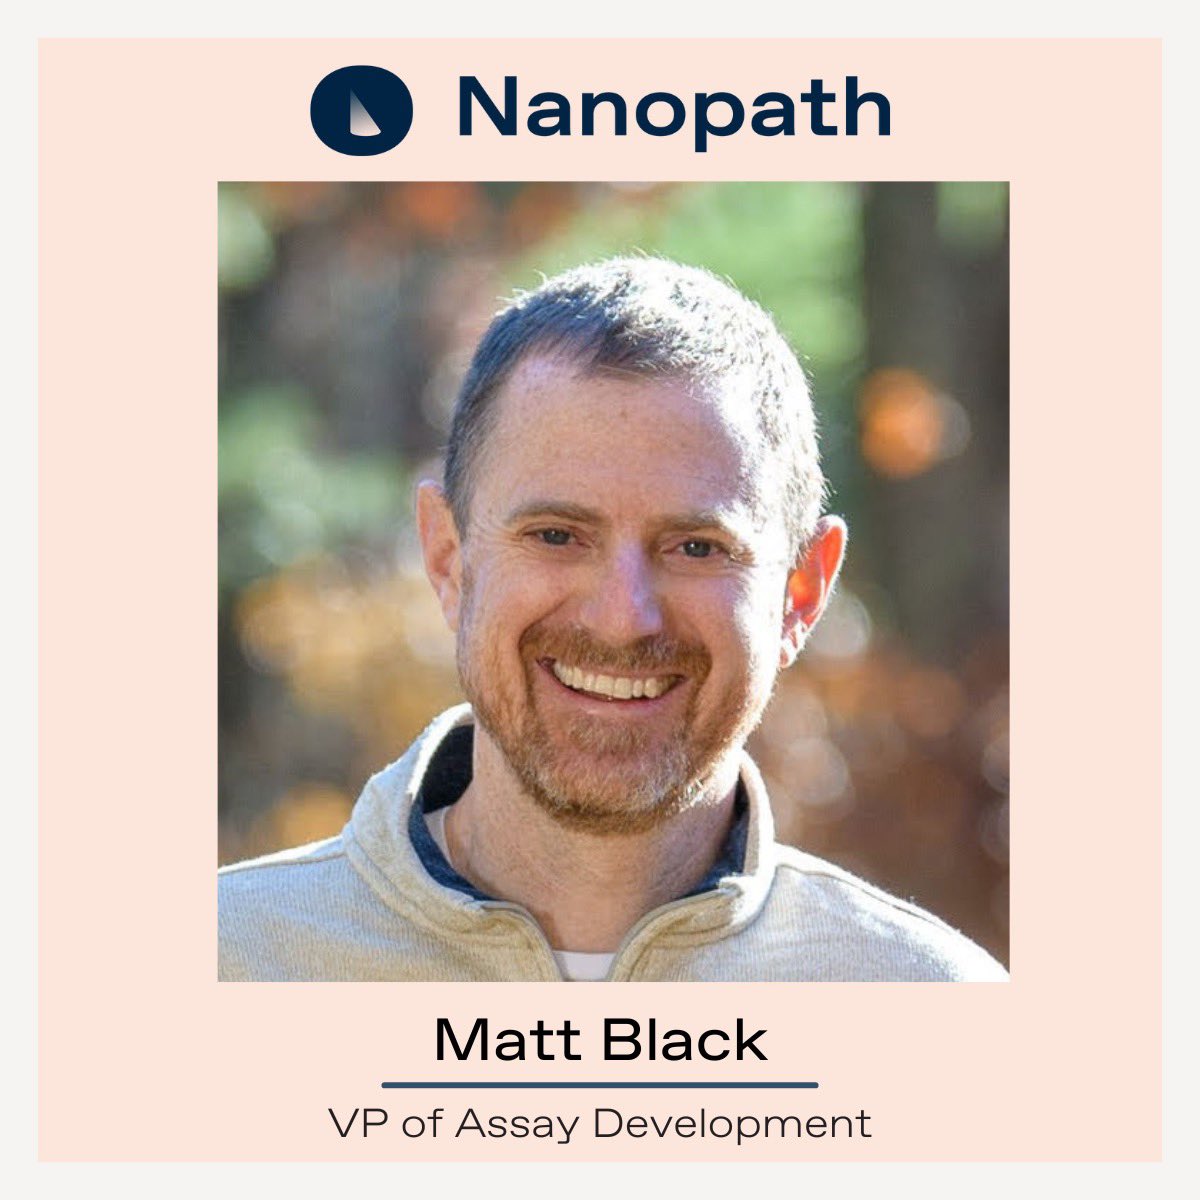 We are so happy to #welcome Matt Black, PhD, to the Nanopath Team as VP of #AssayDevelopment. Matt comes to us with 10 years of #experience leading assay development for the development of #invitro #diagnostics, most recently for #COVID19 and #flu. Welcome to the team, Matt!